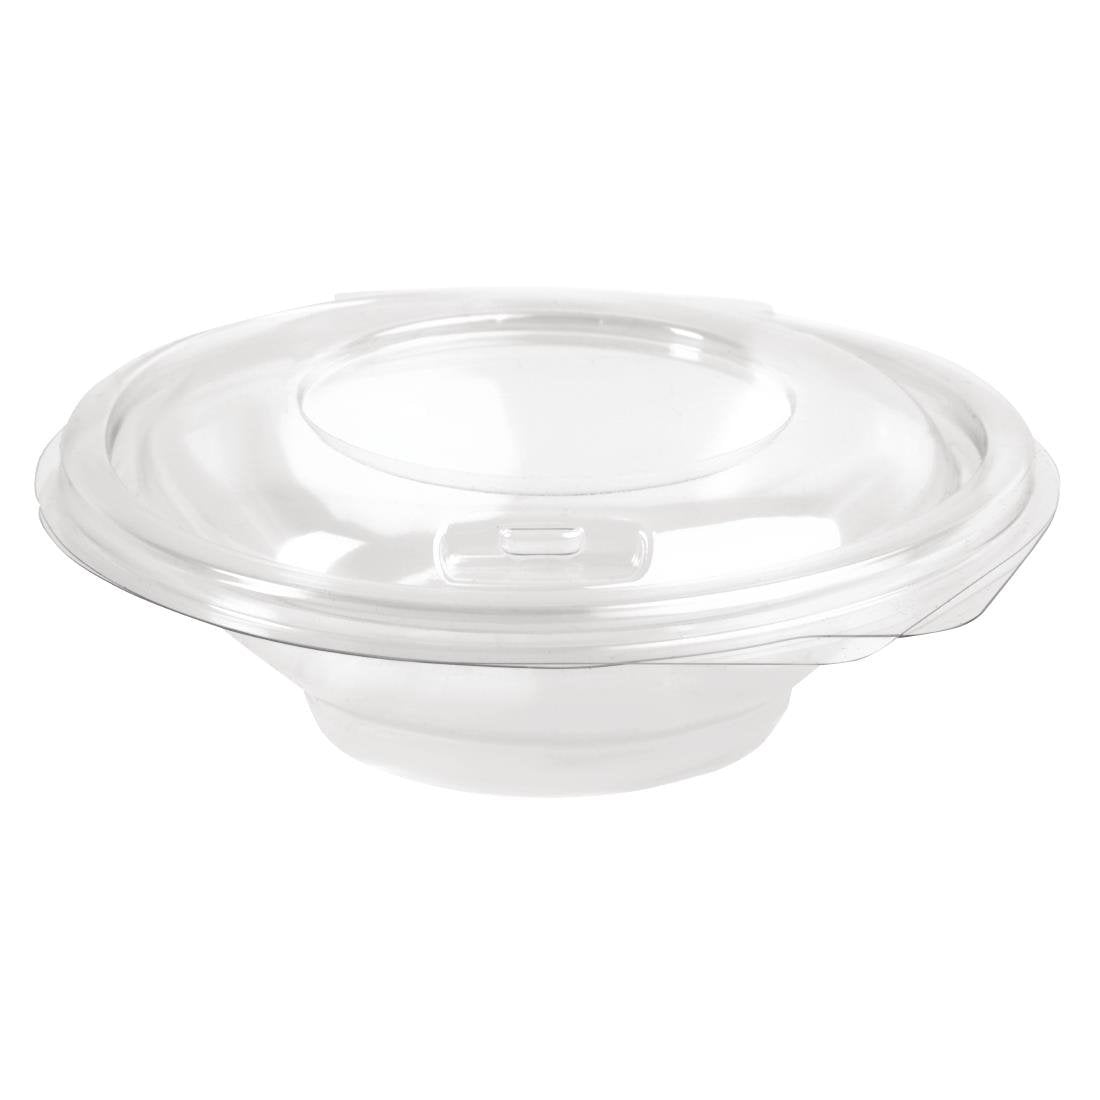 500cc Contour salad container recyclable x200